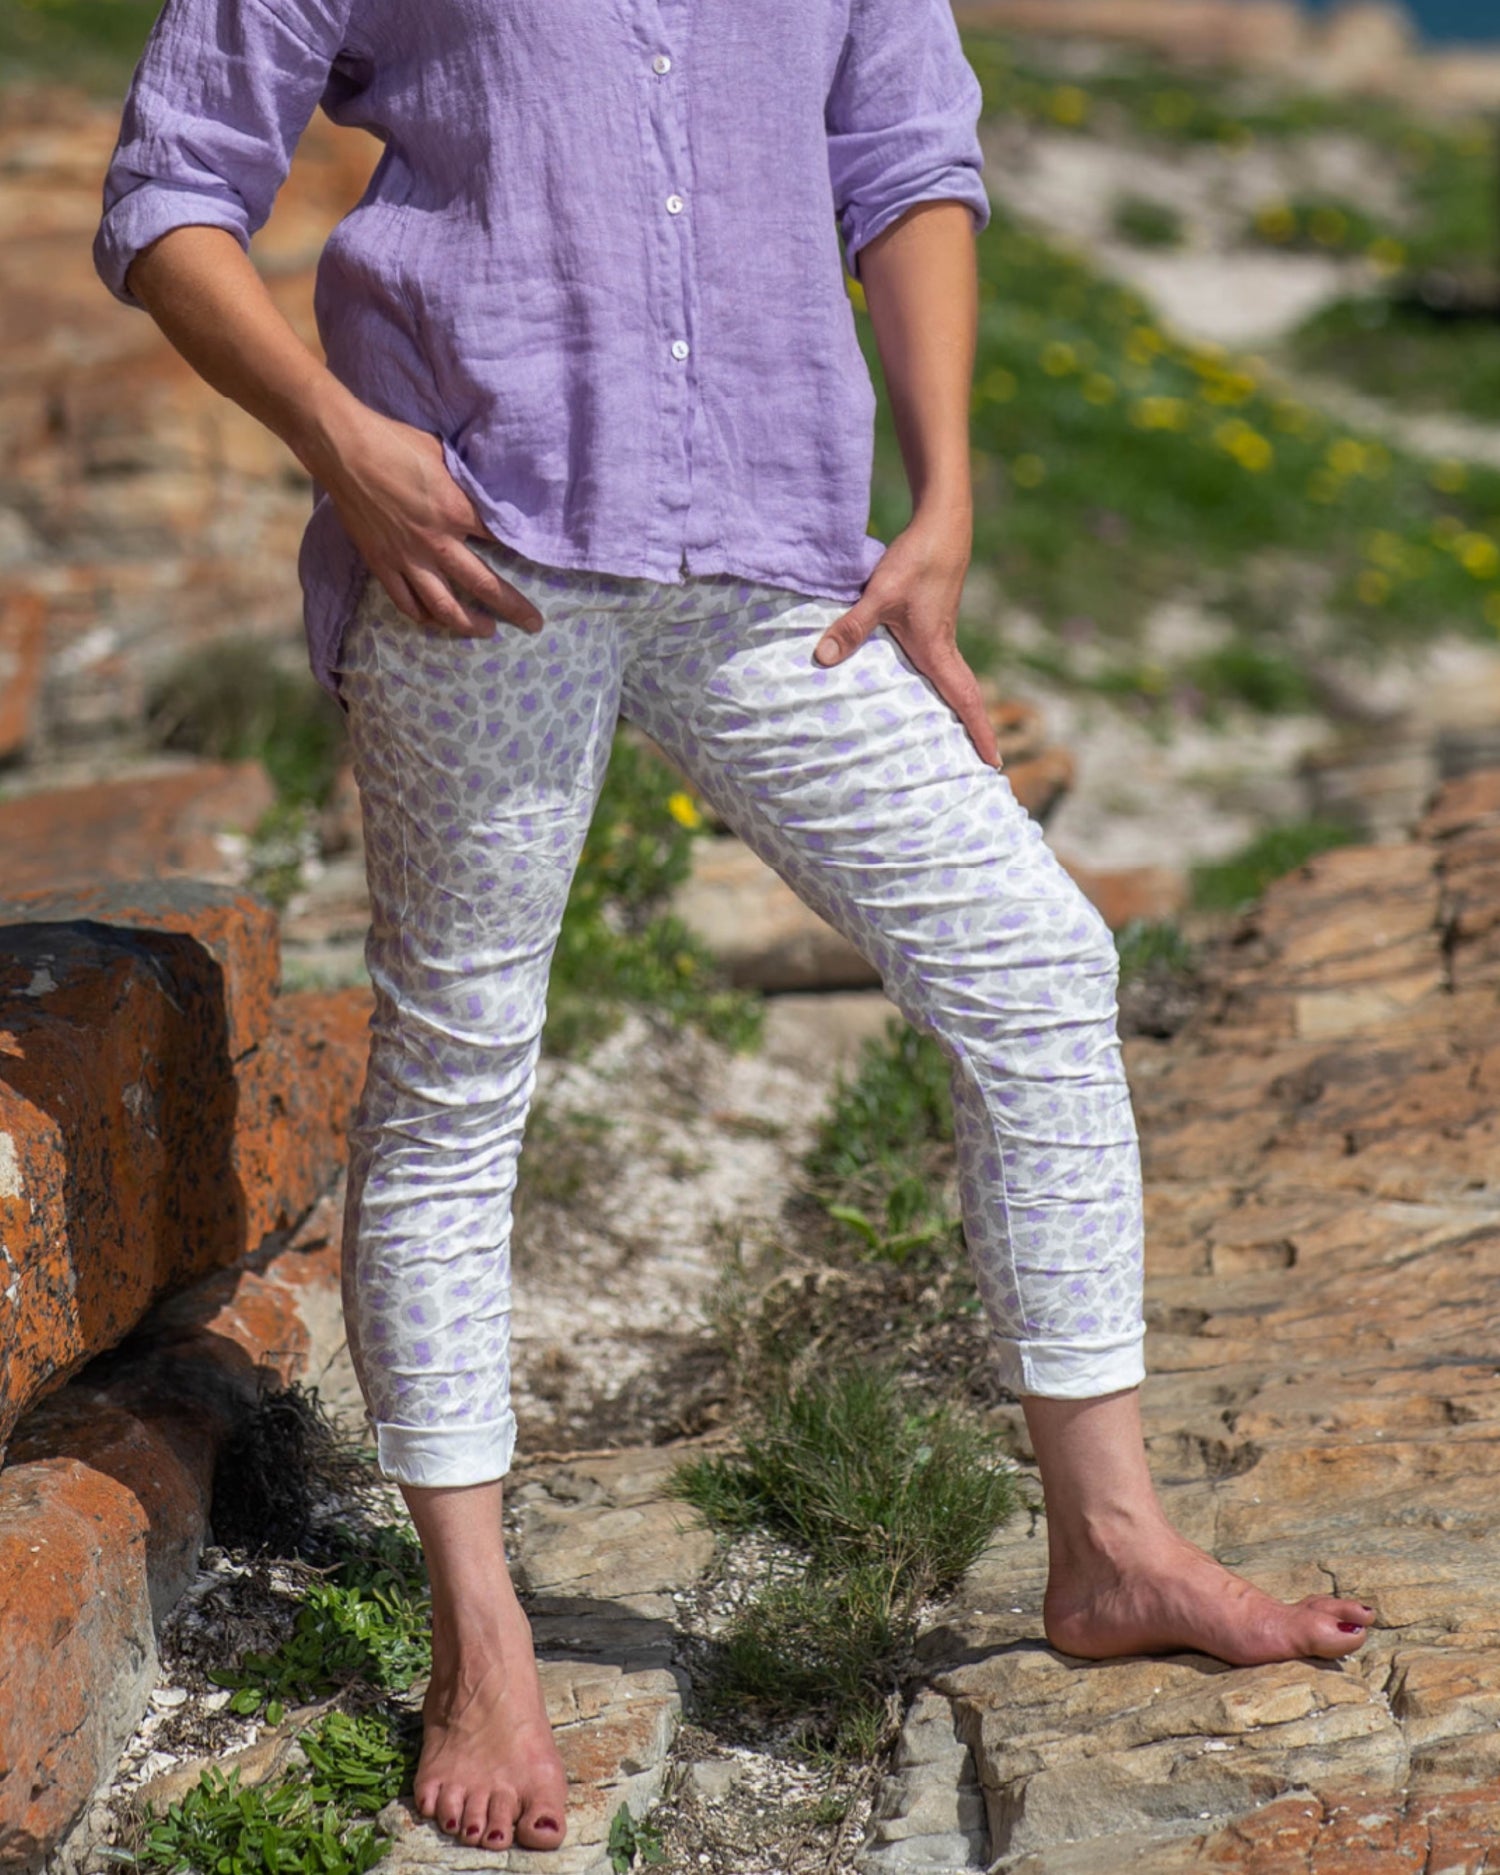 Available in a range of vibrant luminescence colors, these pants offer a fresh and modern twist on the classic leopard print pattern. The fusion of wild and vivid tones adds an electrifying touch, ensuring you stand out wherever you go